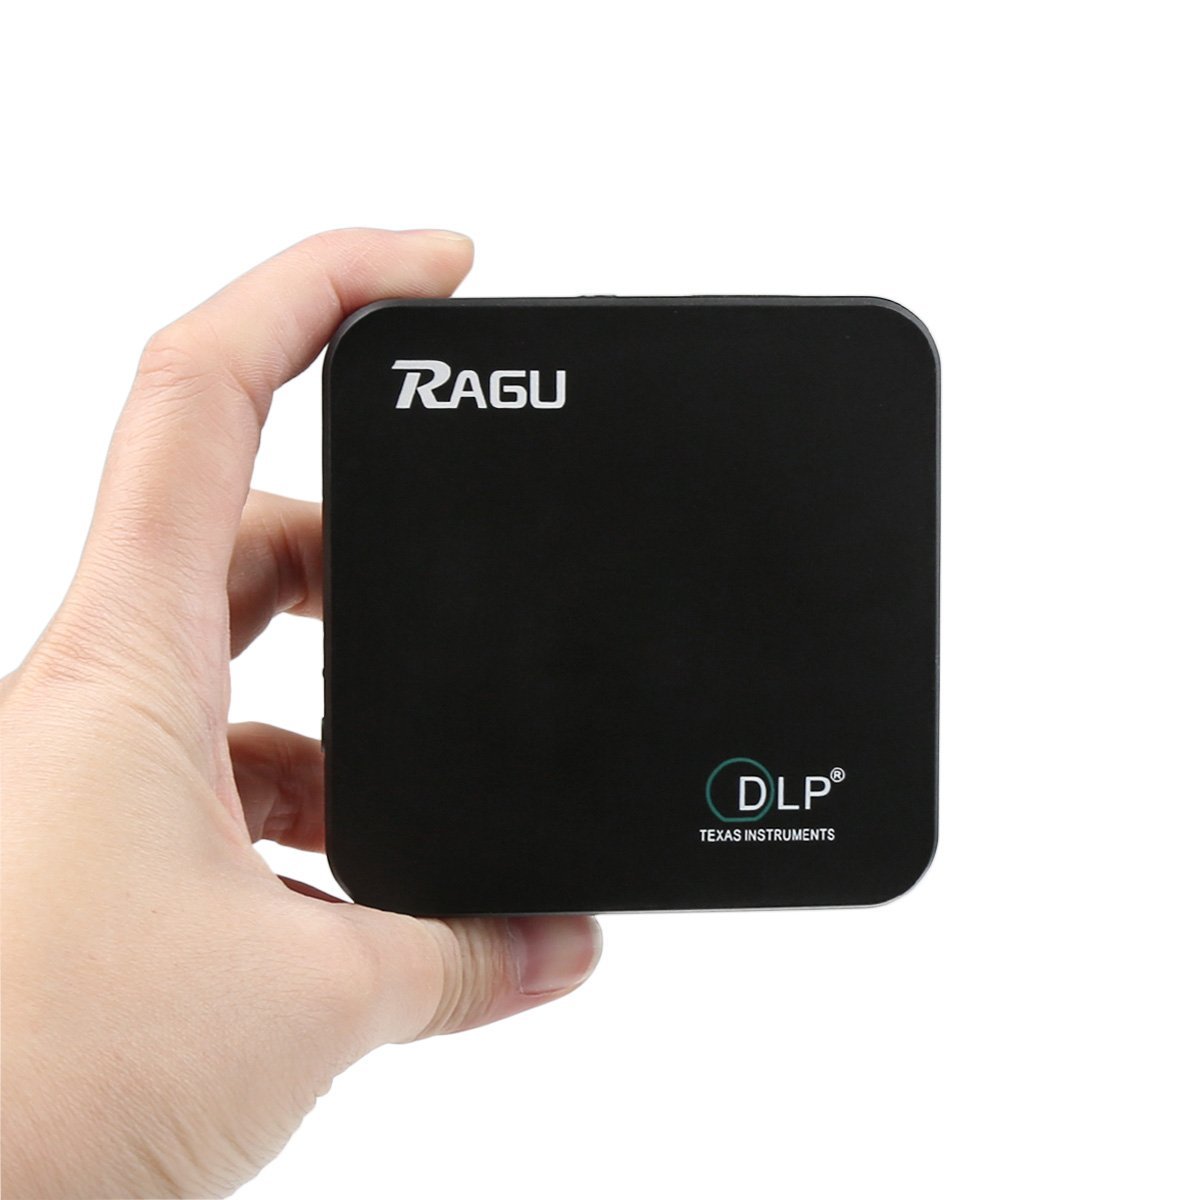 DLP Projector, RAGU Mini Pocket Pico Projector Android 4.4 Smart Wi-Fi Portable Projector 1080P, 1GB RAM, 8GB ROM with USB Ports and SD Card Slot plus Stand